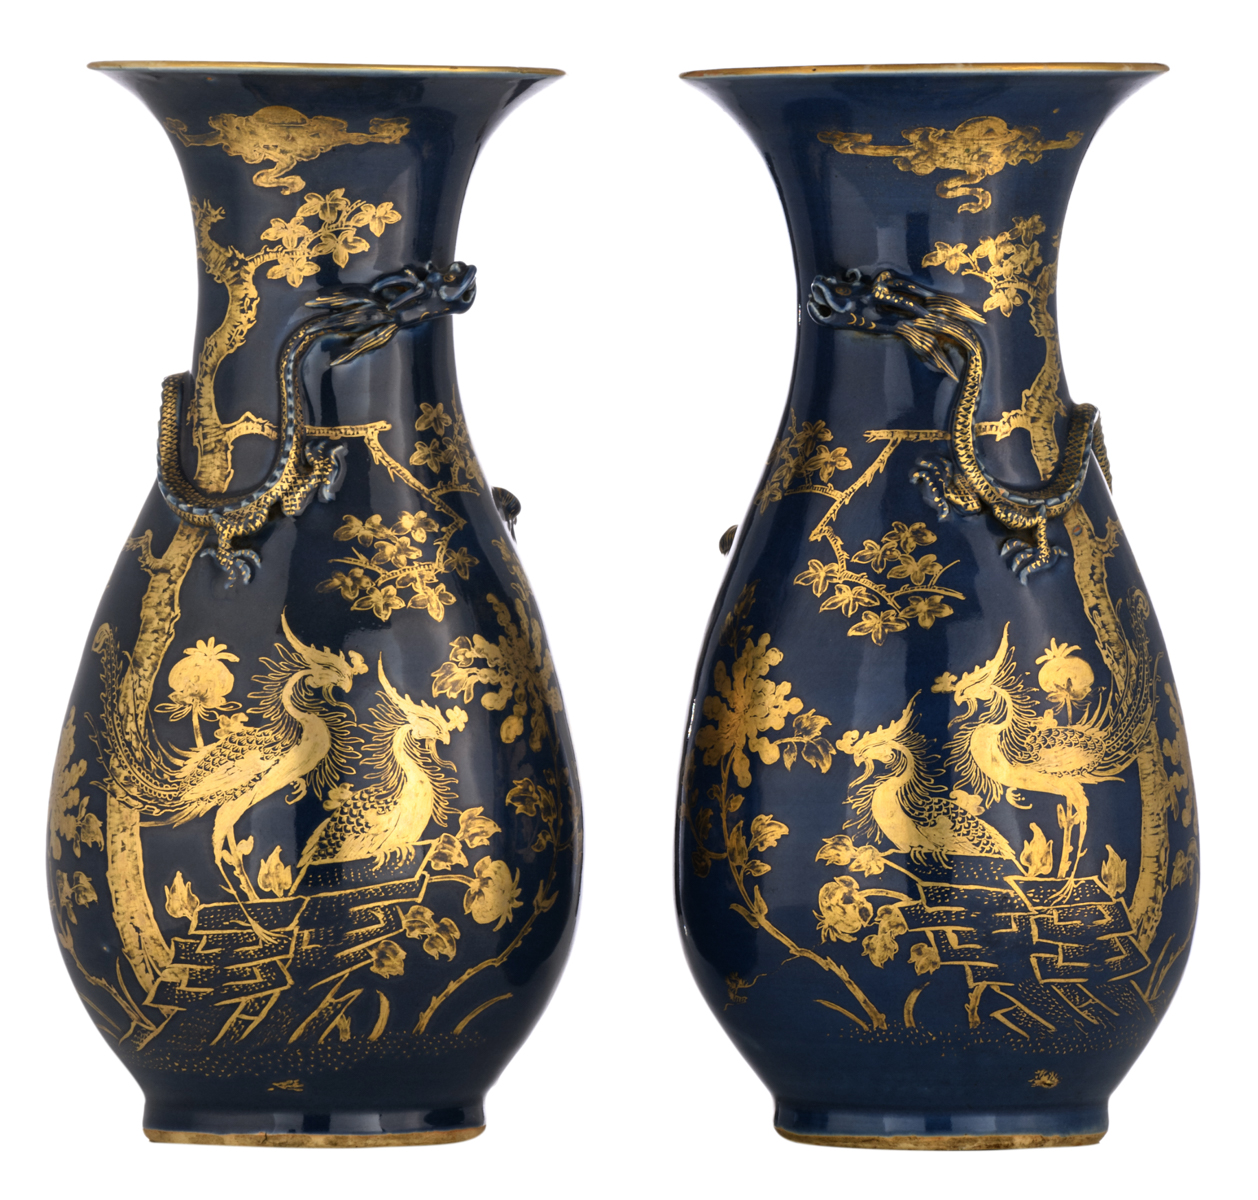 A pair of Chinese 'bleu soufflé' pear shaped vases, gilt and relief decorated with dragons and